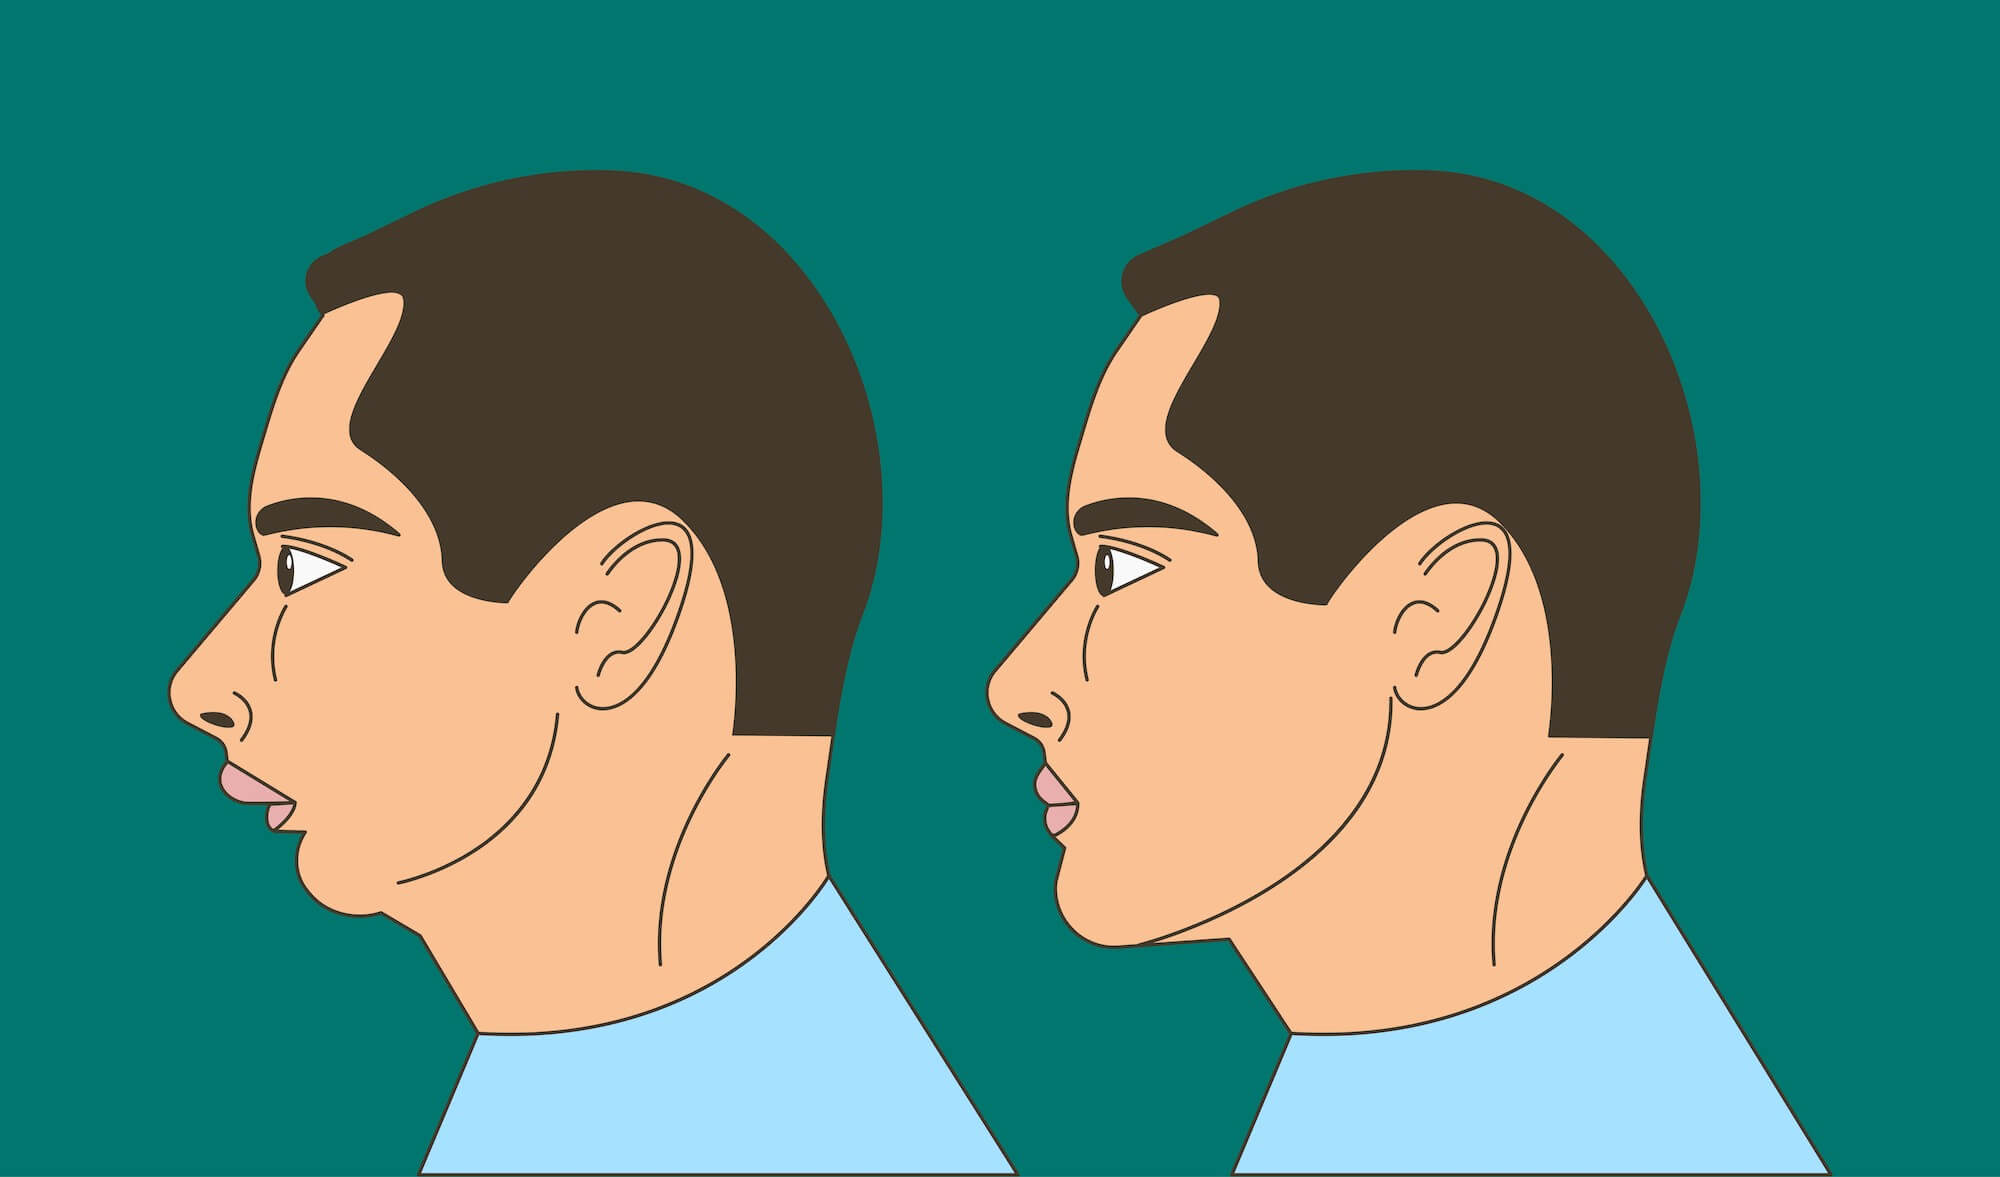 Mewing and Orthotropics: How to Change Your Facial Bone Structure